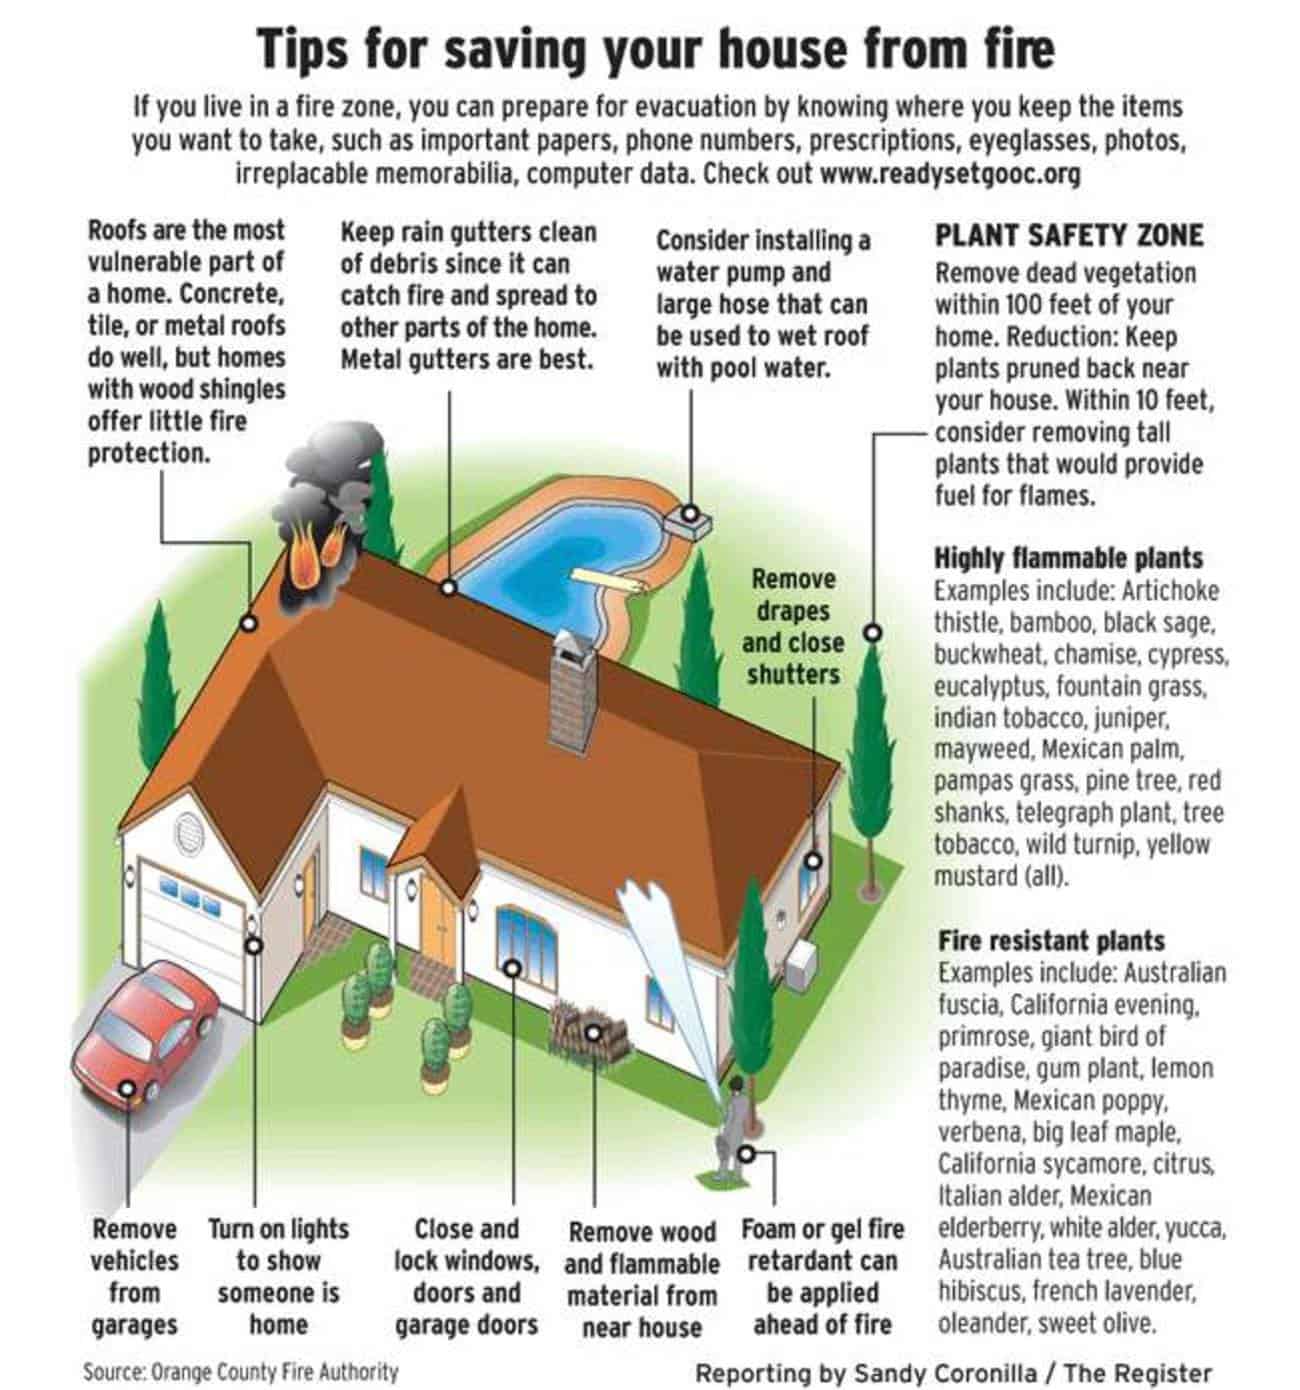 Tips for saving your house from a fire